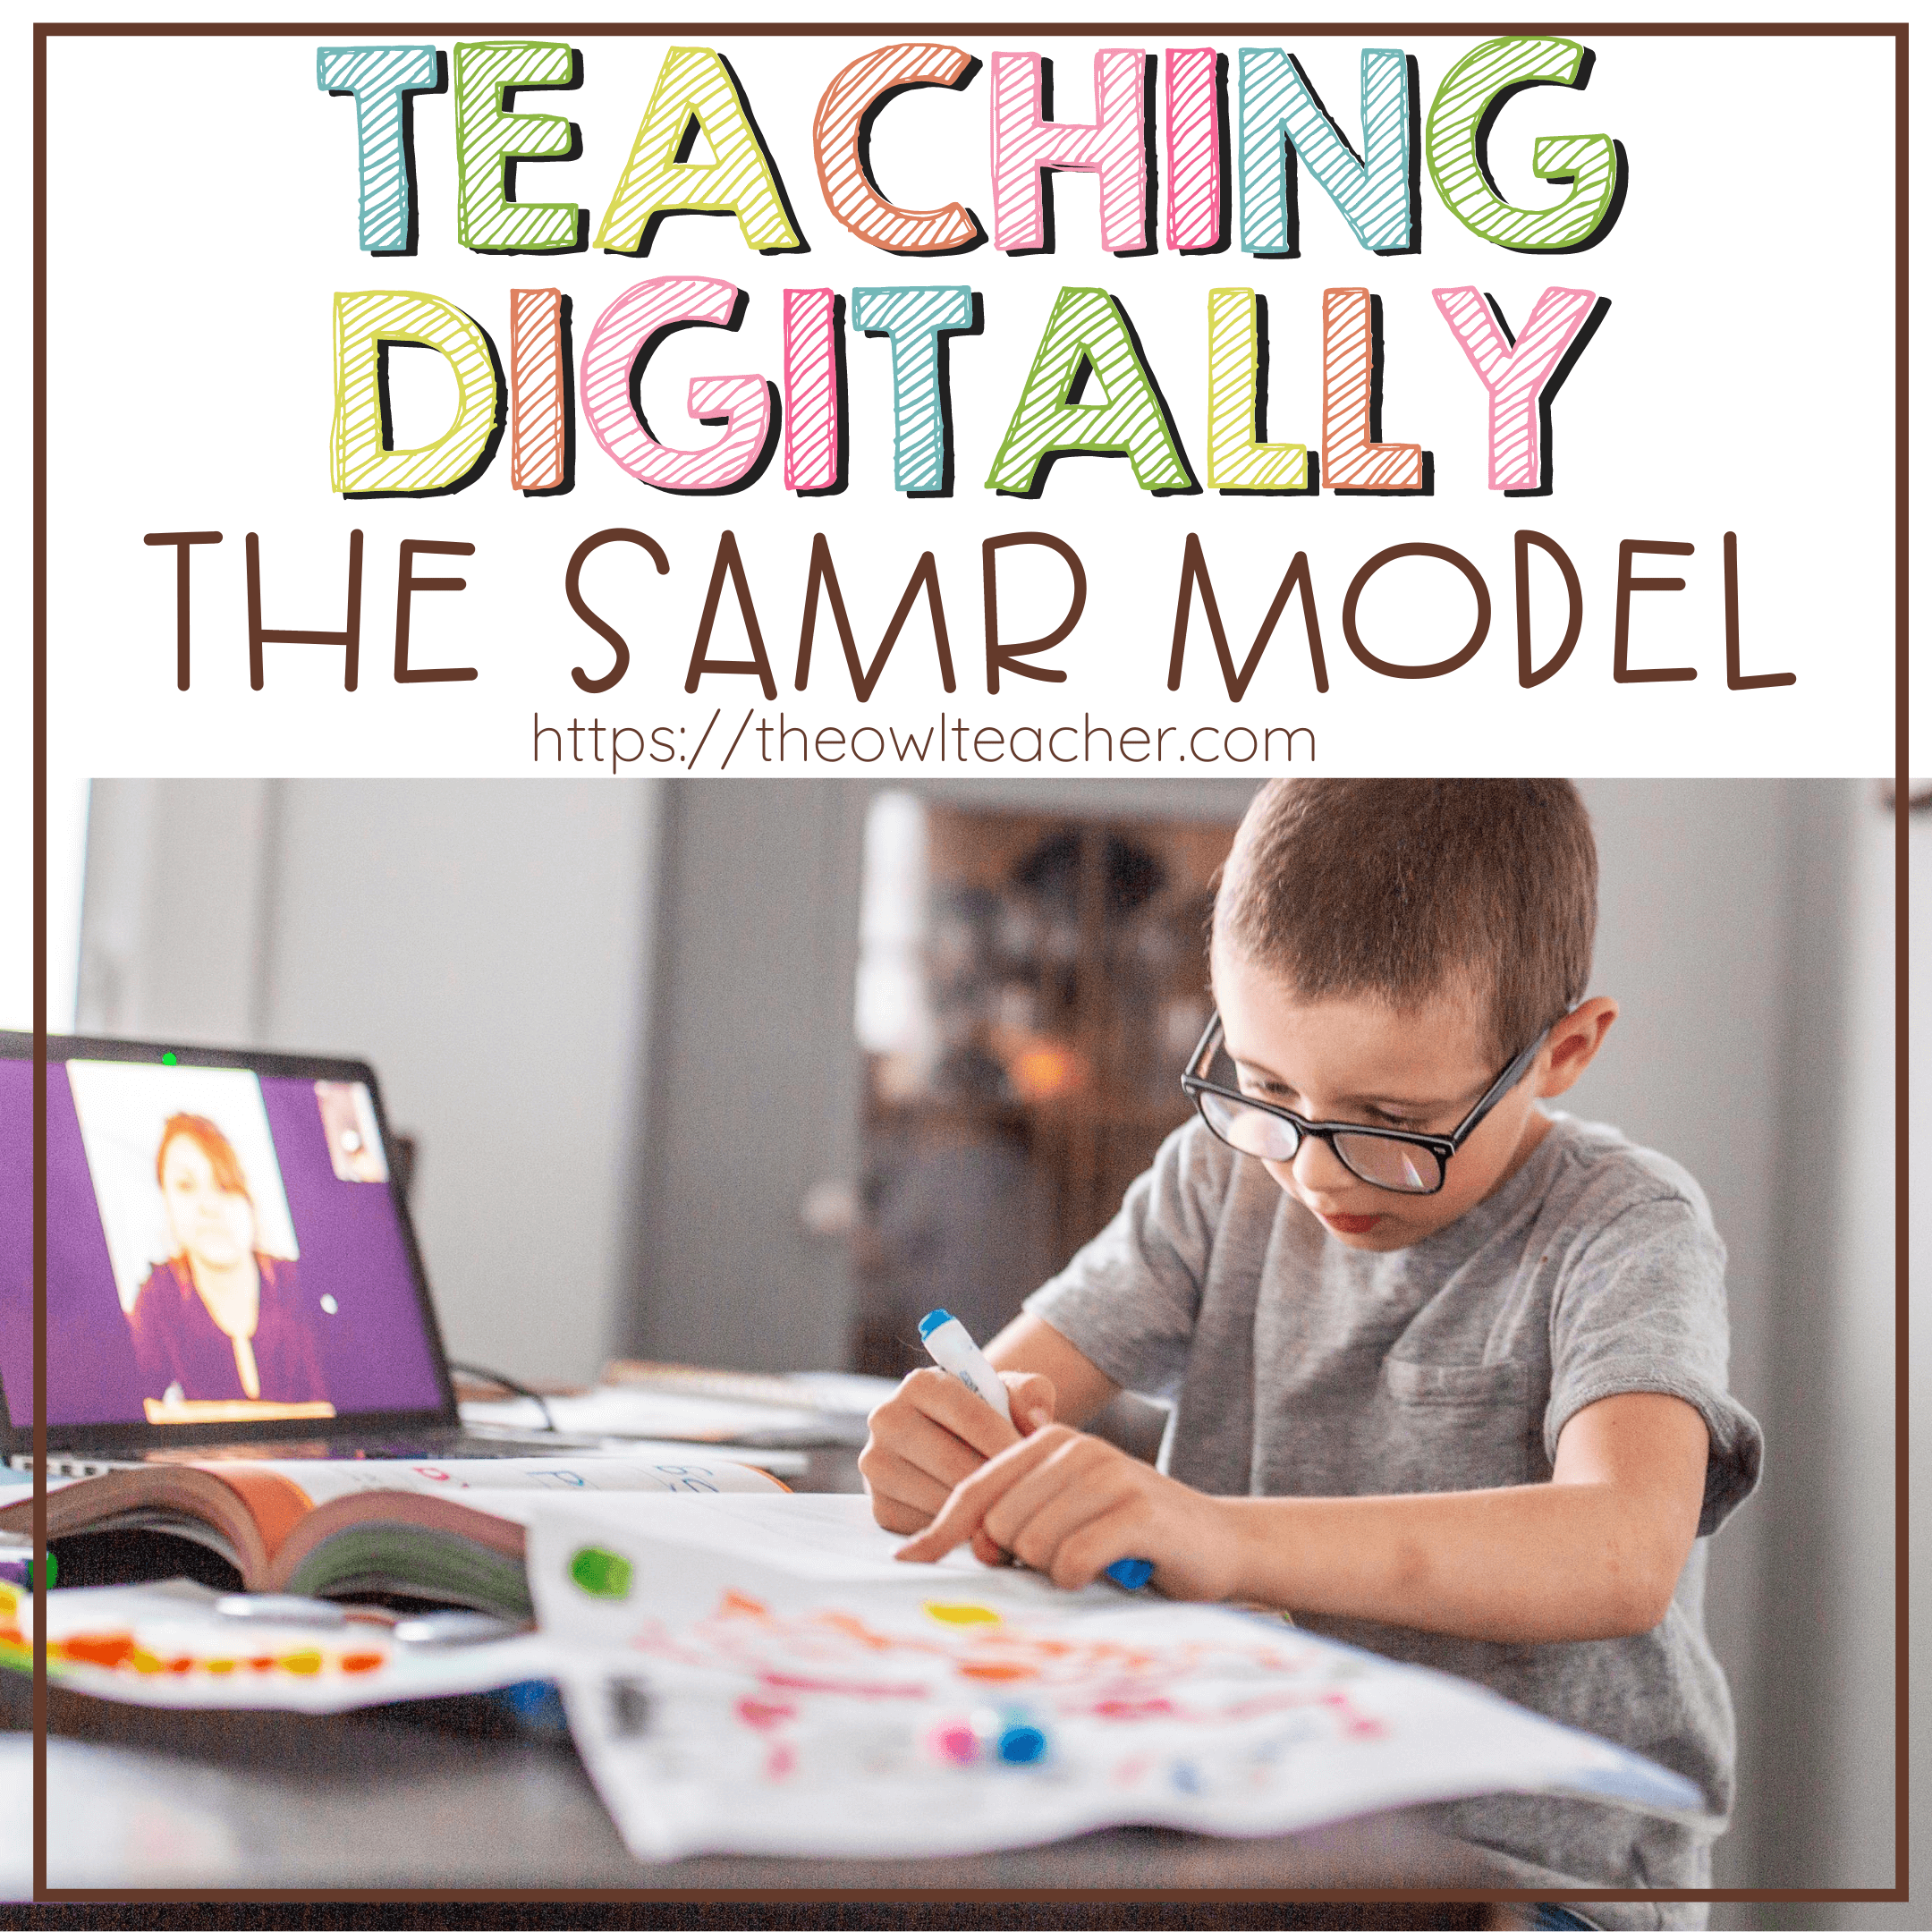 Incorporating technology has always been a part of our teaching, but now with distance learning and teaching digitally, we have to incorporate more than ever! Learn about the SAMR model and how it affects online learning and the technology you use in the online classroom!